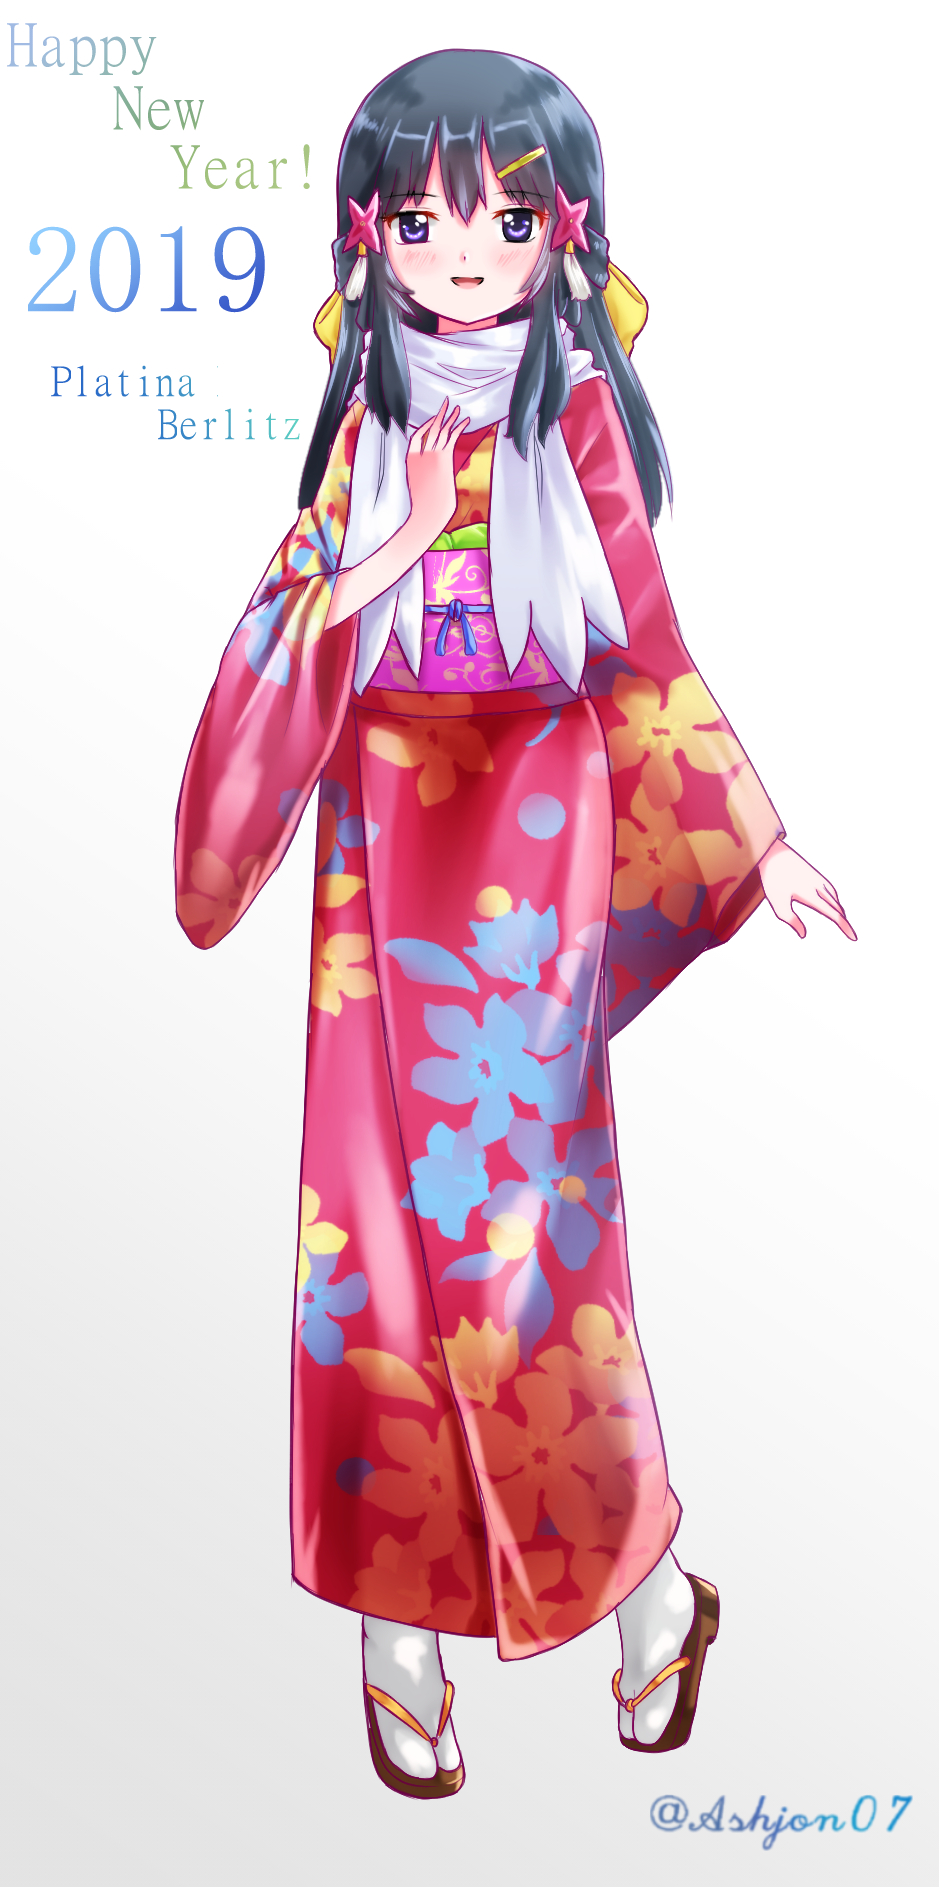 1girl 2019 :d ashujou bangs black_hair blush eyebrows_visible_through_hair floral_print full_body hair_between_eyes hair_ornament hairclip happy_new_year highres japanese_clothes kimono long_hair long_sleeves looking_at_viewer new_year obi open_mouth platinum_berlitz pokemon pokemon_special print_kimono red_kimono sash shiny shiny_hair simple_background smile solo standing tabi twitter_username violet_eyes white_background white_legwear wide_sleeves